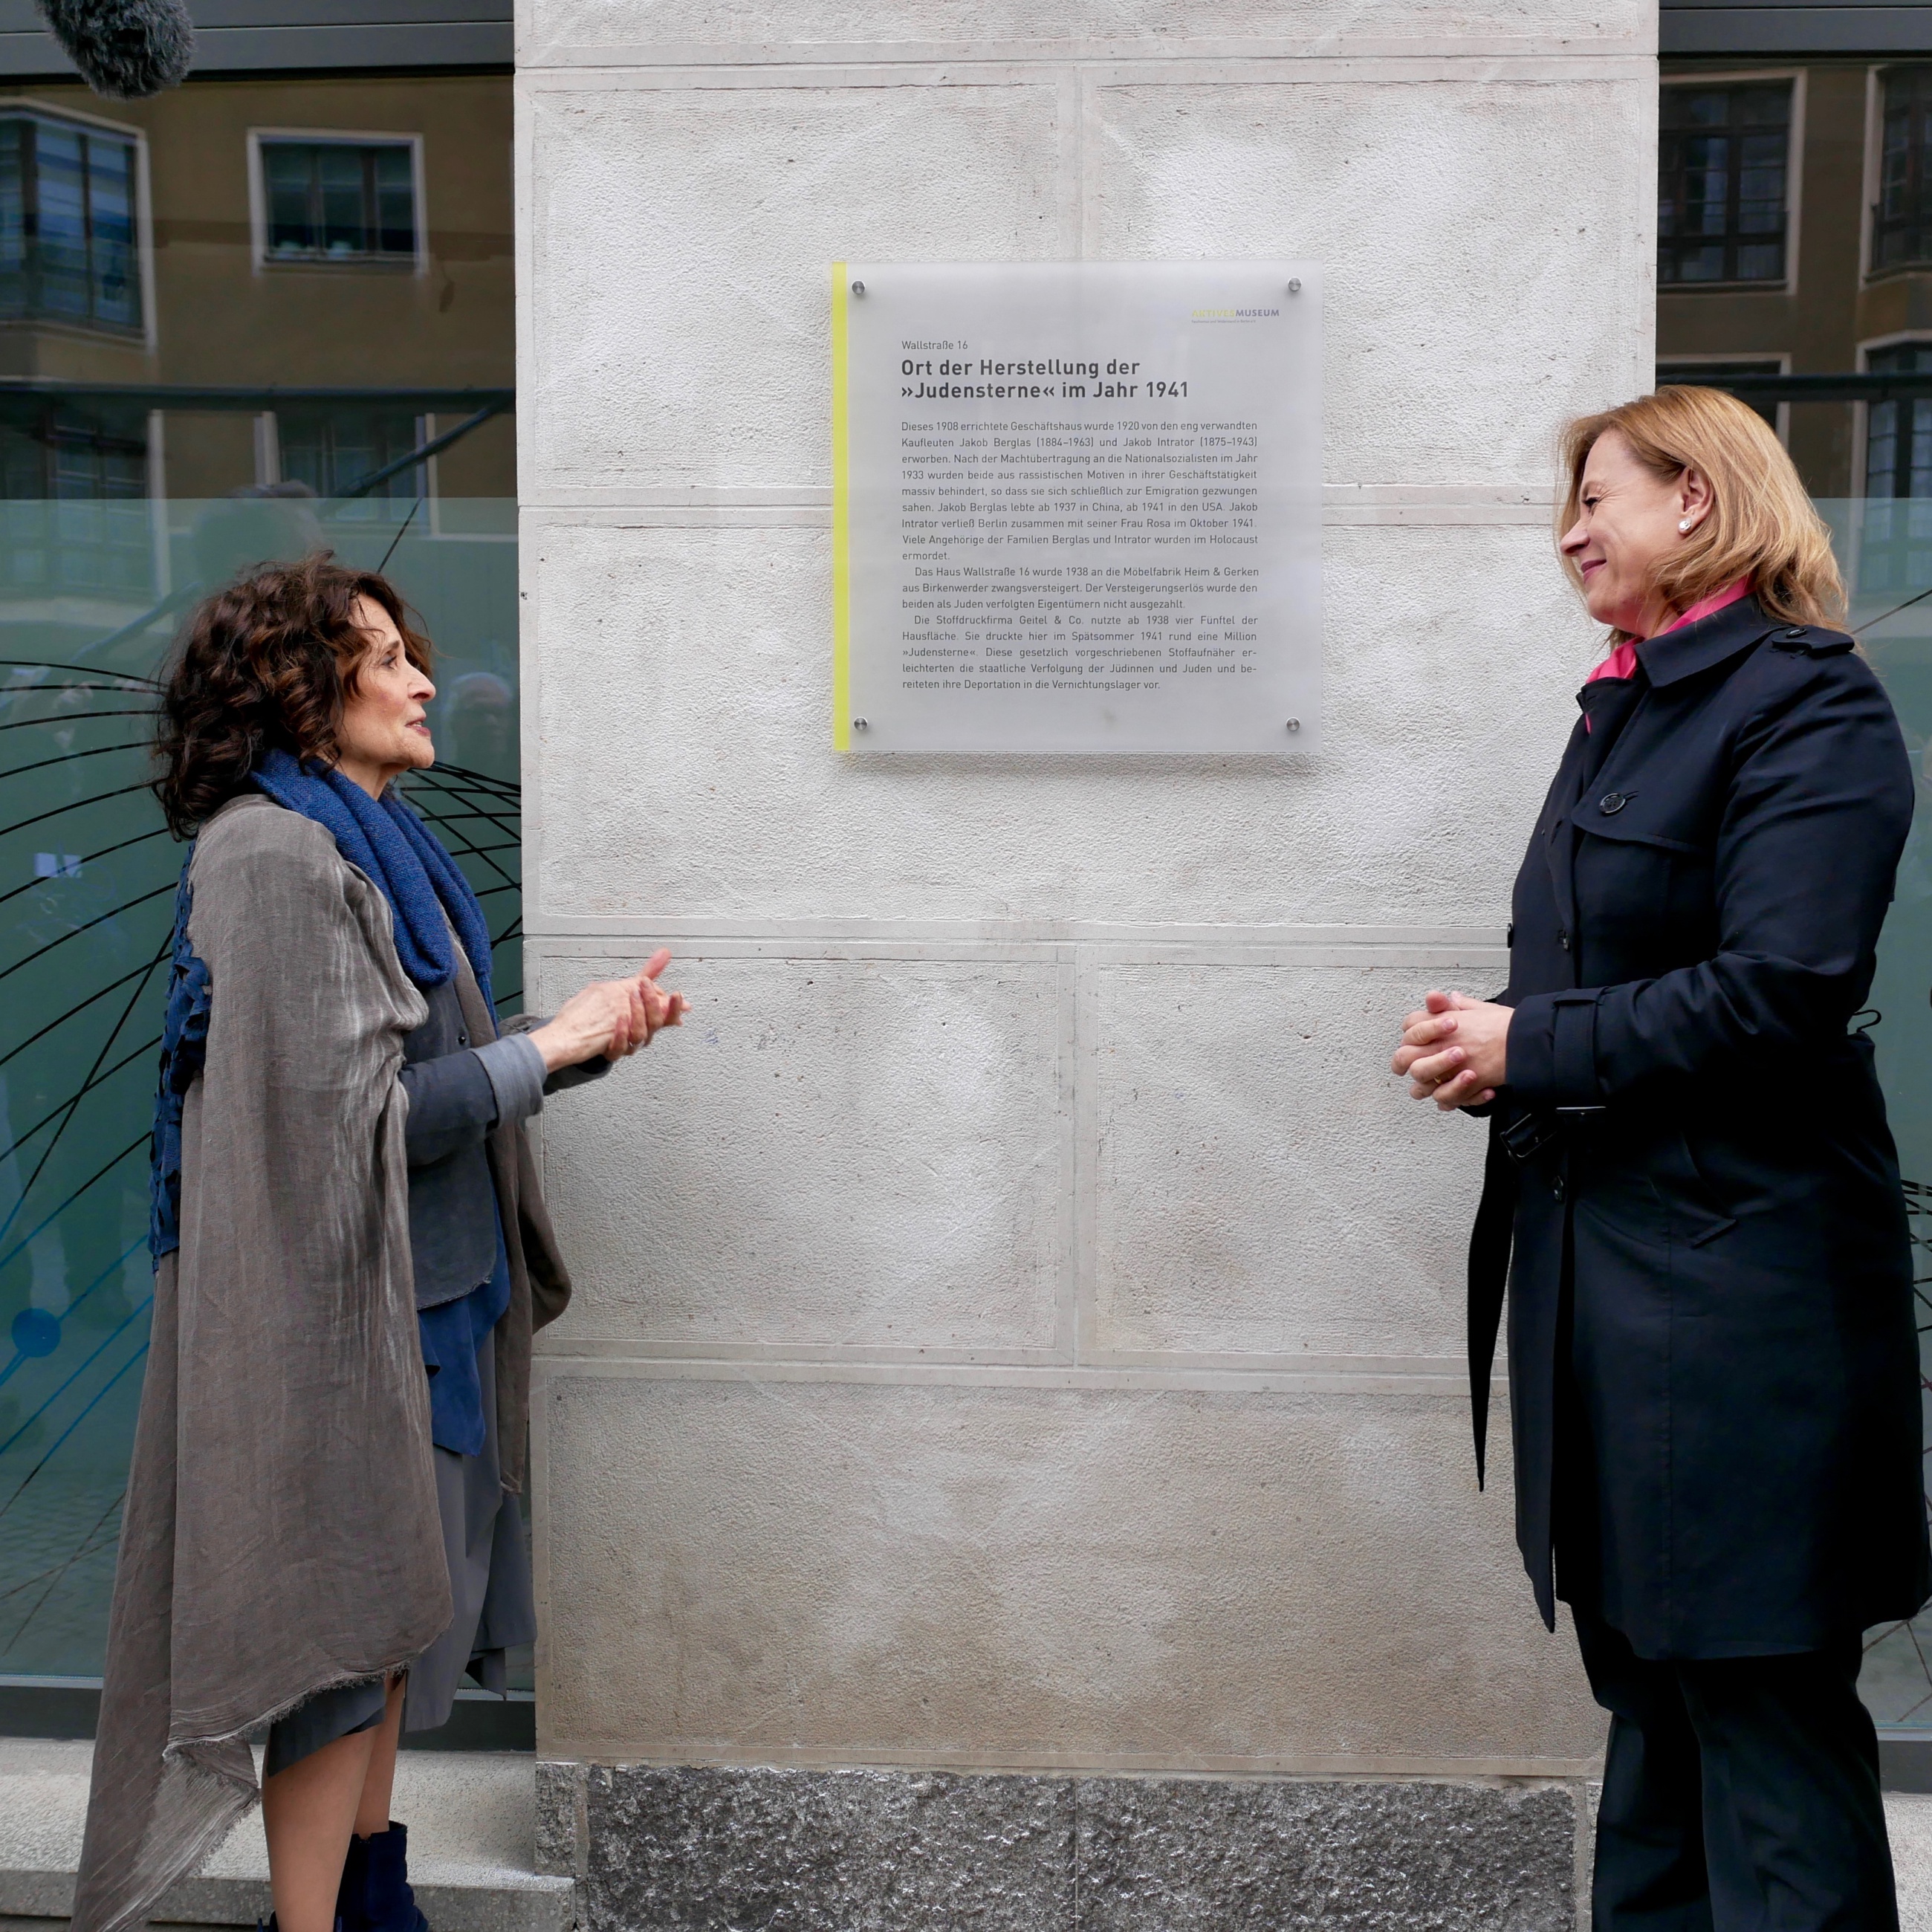 Joanne Intrator, granddaughter of Jakob Intrator, and Charlotte Warakaulle, CERN's Director for International Relations, standing in front of the commemorative plaque